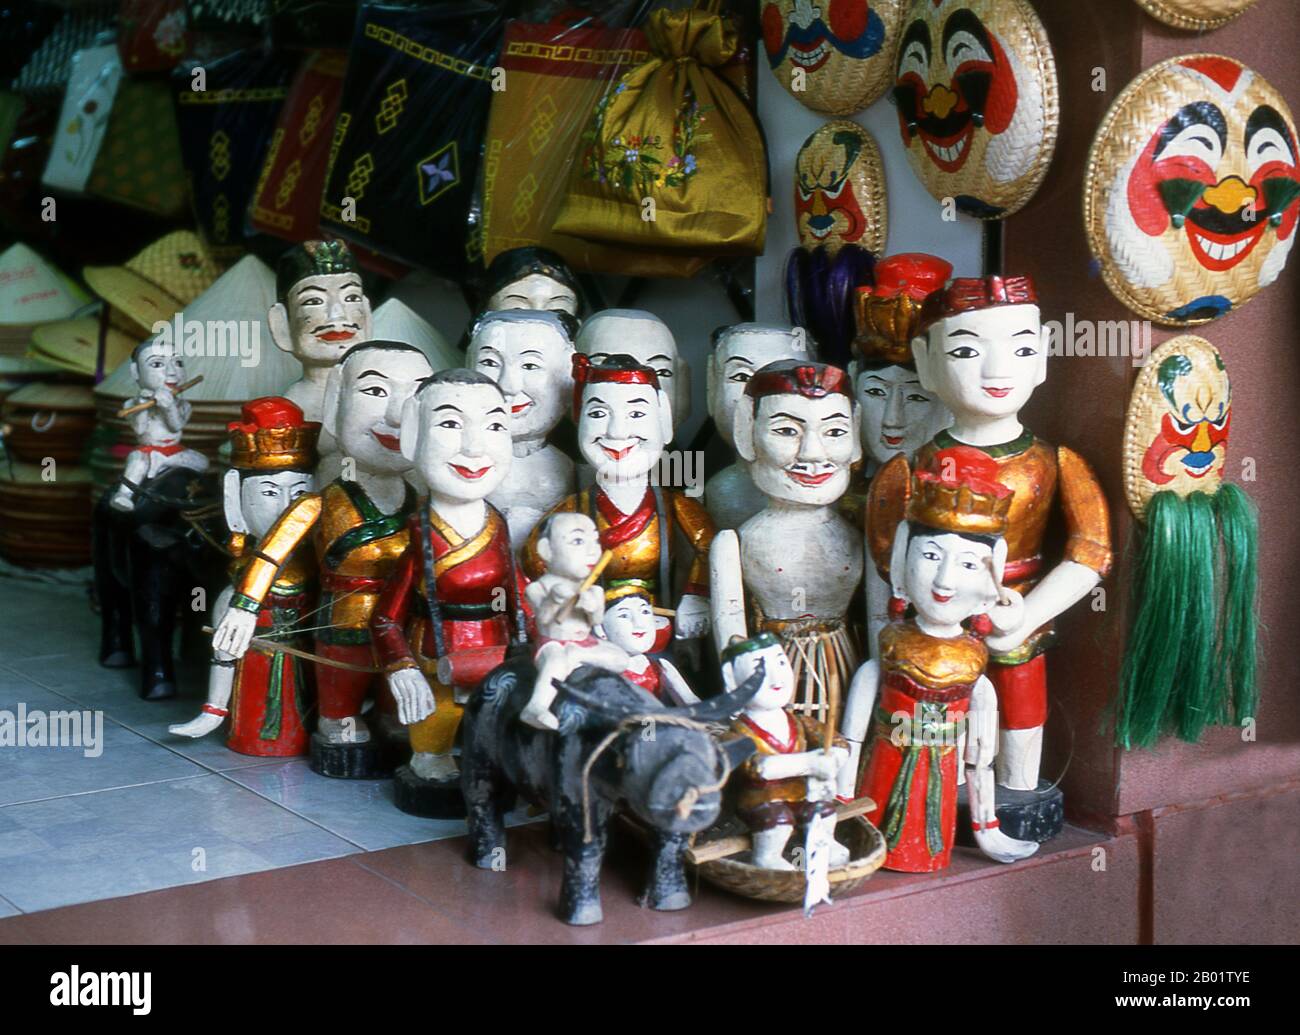 Vietnam: Water puppets for sale near Ho Hoan Kiem Lake, Hanoi.  Water Puppetry or Múa rối nước, literally 'puppets that dance on water' originated in the Red River Delta. The puppets are carved from water-resistant wood to represent traditional rural lifestyles and mythical creatures. Standing behind the watery stage, waist-deep in water, the hidden puppeteers skillfully manoeuvre their wooden charges to the music of a traditional orchestra. Stock Photo